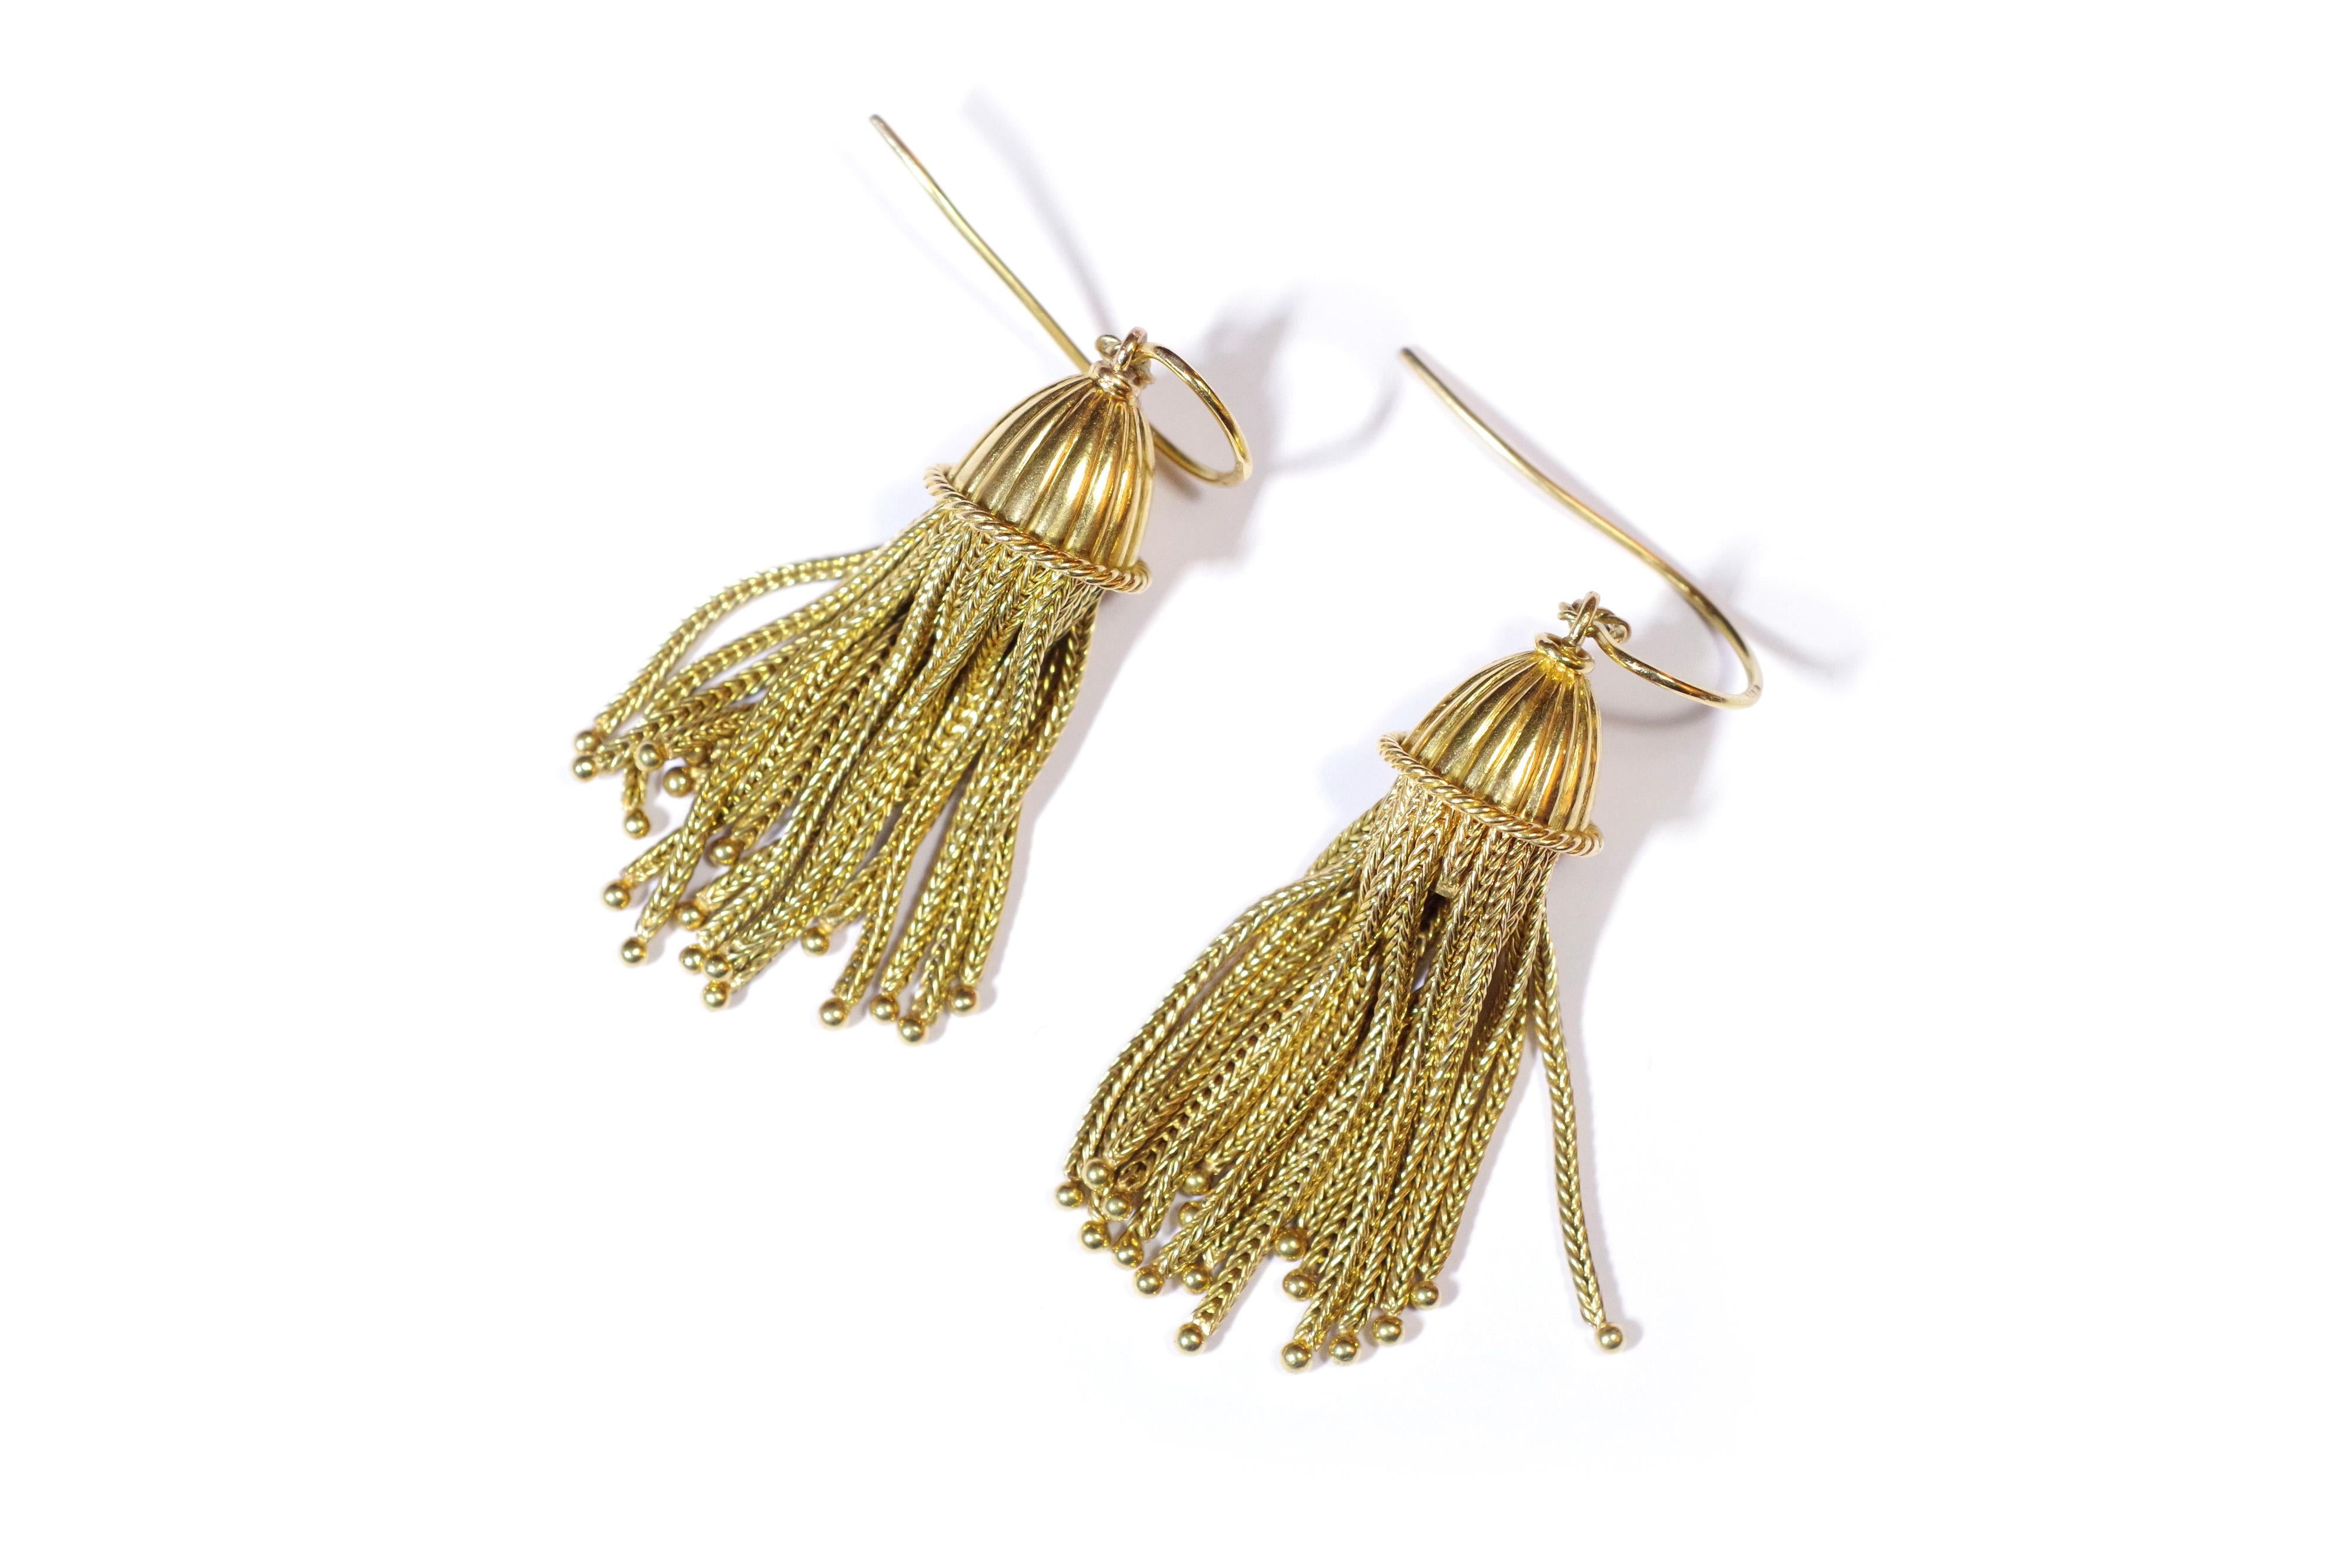 Antique tassels earrings in yellow gold 18 karats. Earrings composed of a chiselled dome with a beaded frieze, gathering a multitude of braided gold strands. The earrings are mounted on a swan neck. Antique tassel earrings, Napoleon III